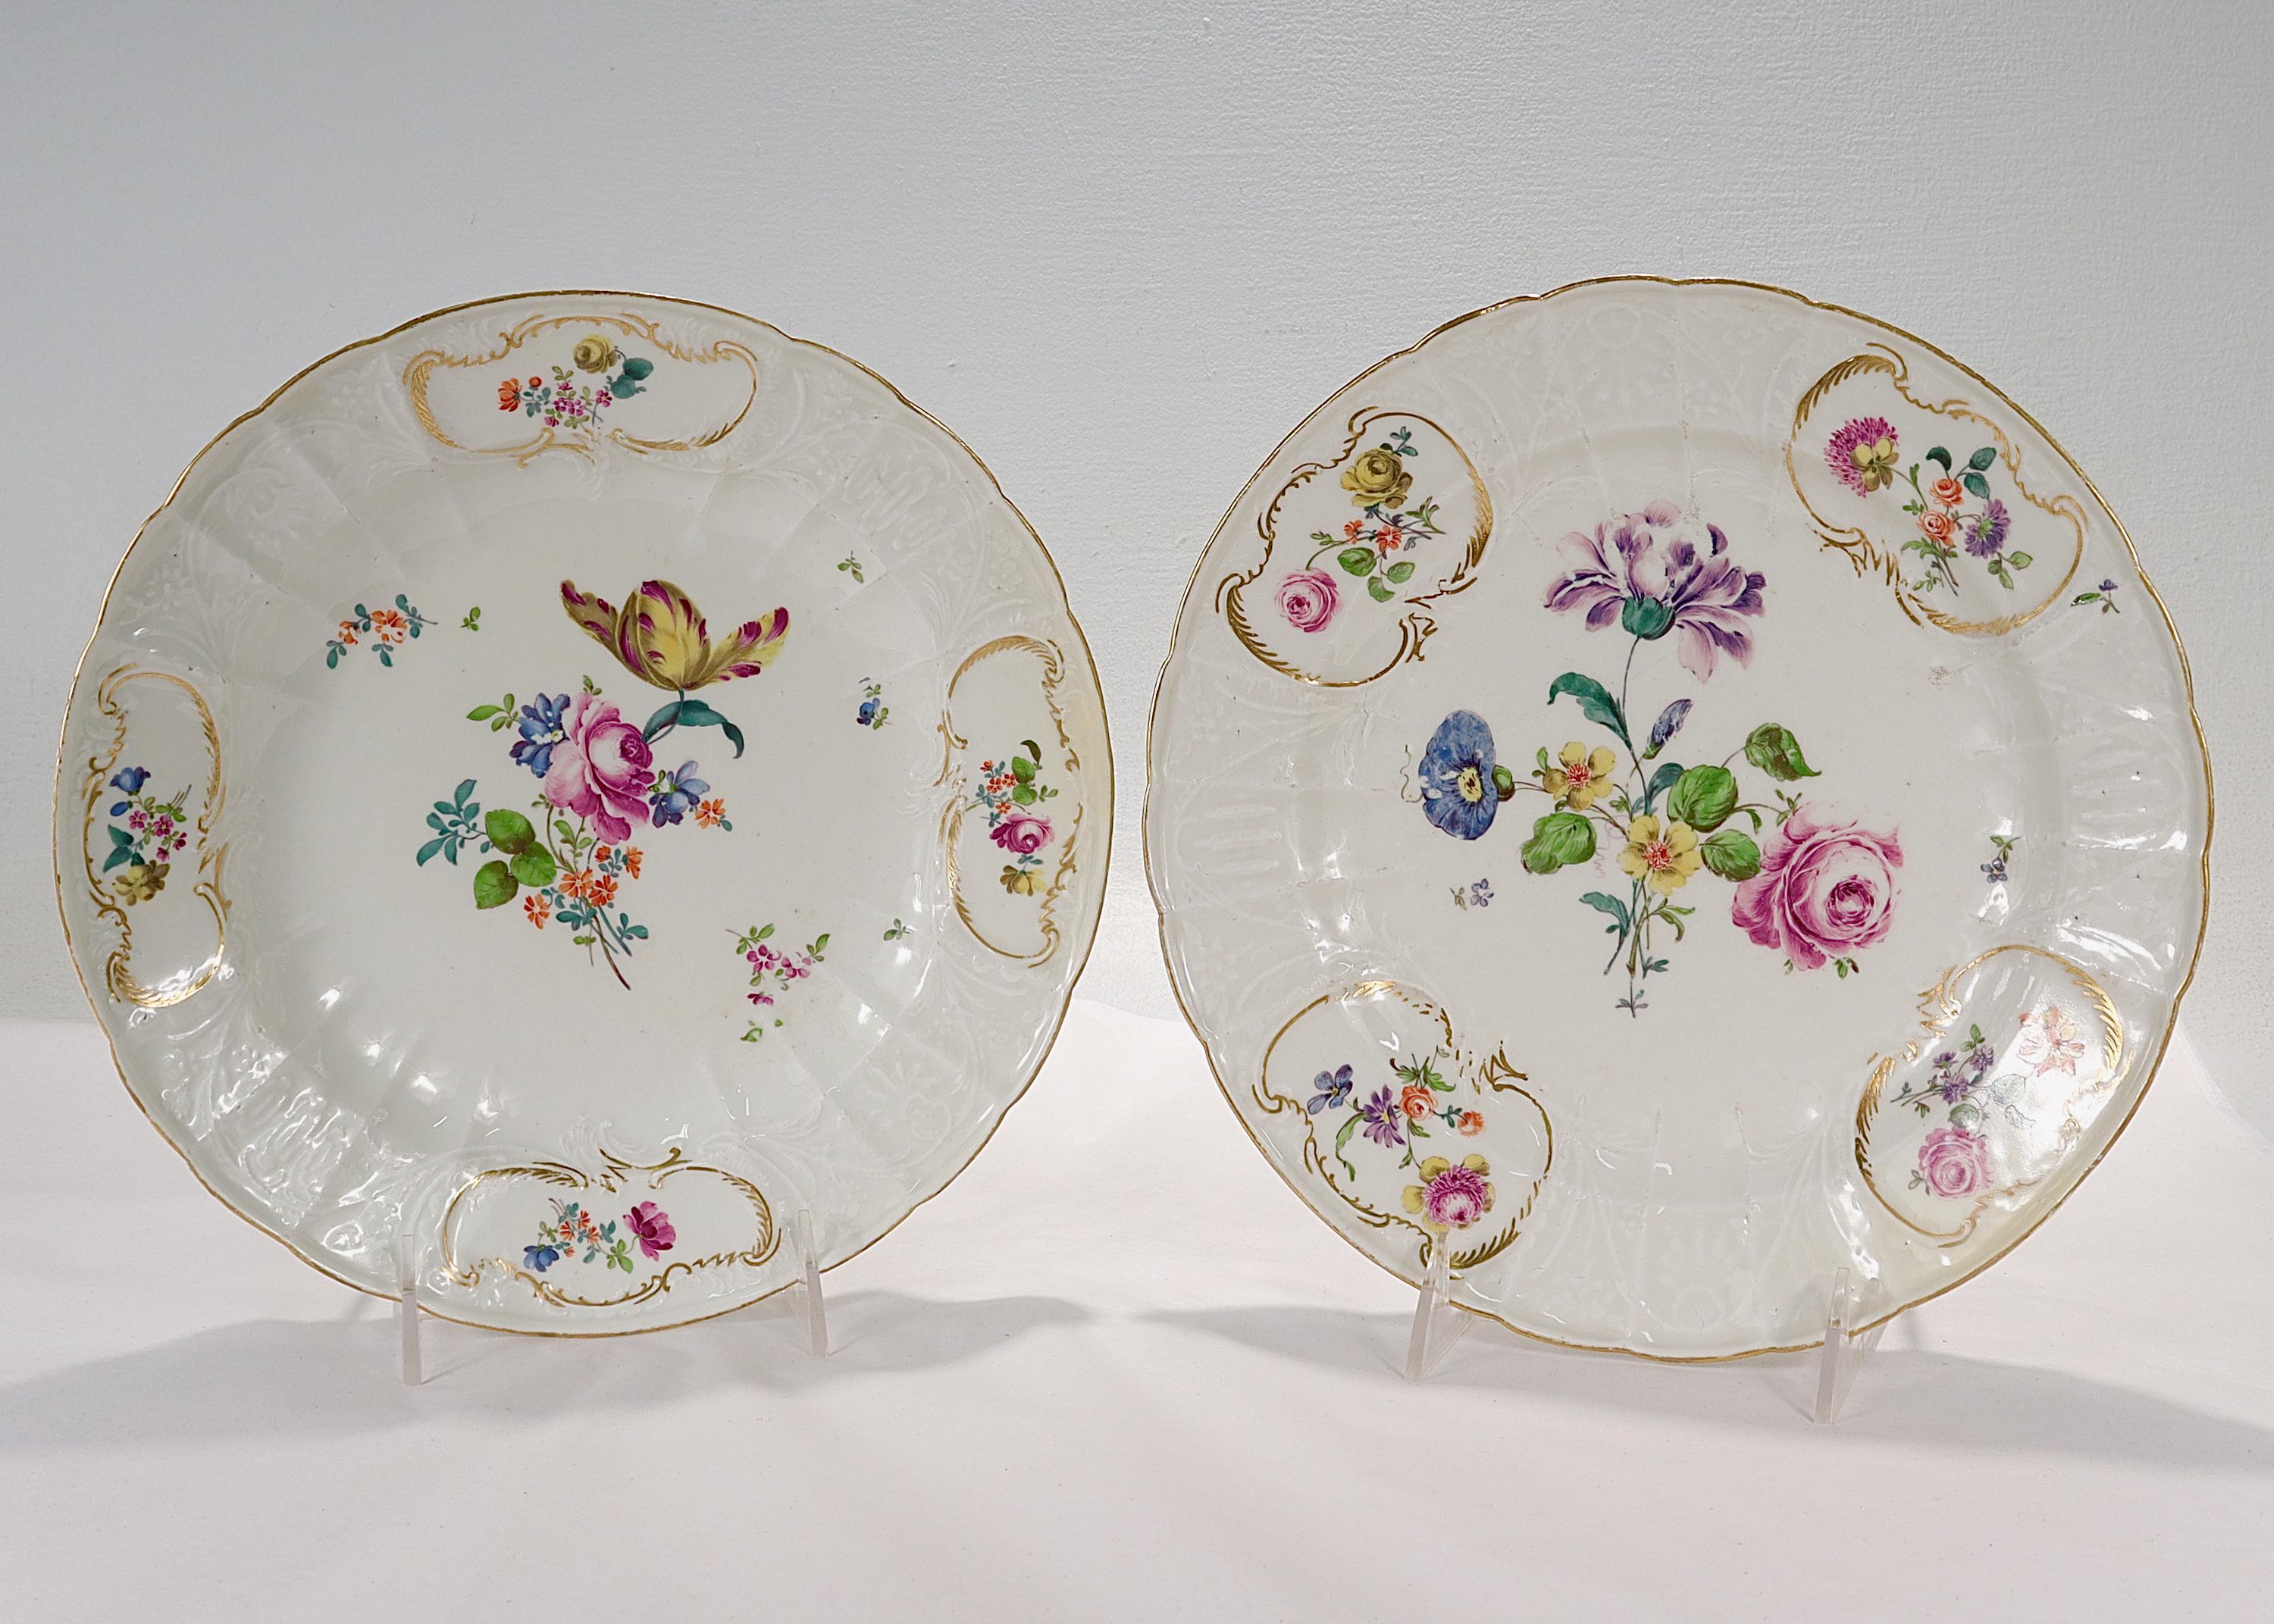 A fine pair of antique Meissen Dulong Variant plates.

By the Royal Meissen Porcelain Manufactory.

Decorated with Deutsche Blumen floral sprays to the center and sides including roses, tulips, morning glories, and other various flowers. 

The